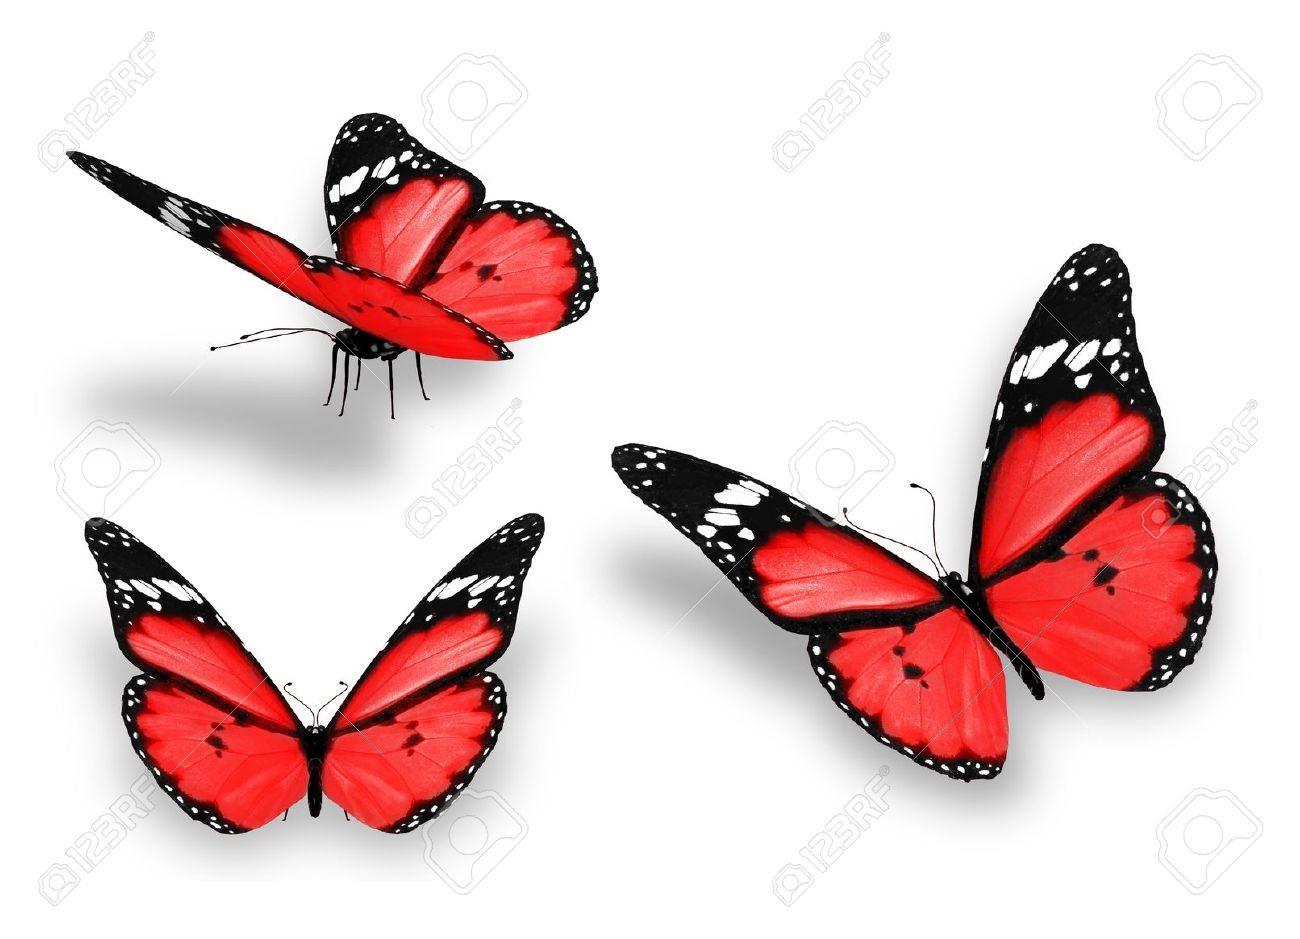 Download Free Beautiful Butterfly Image with Flowers HD